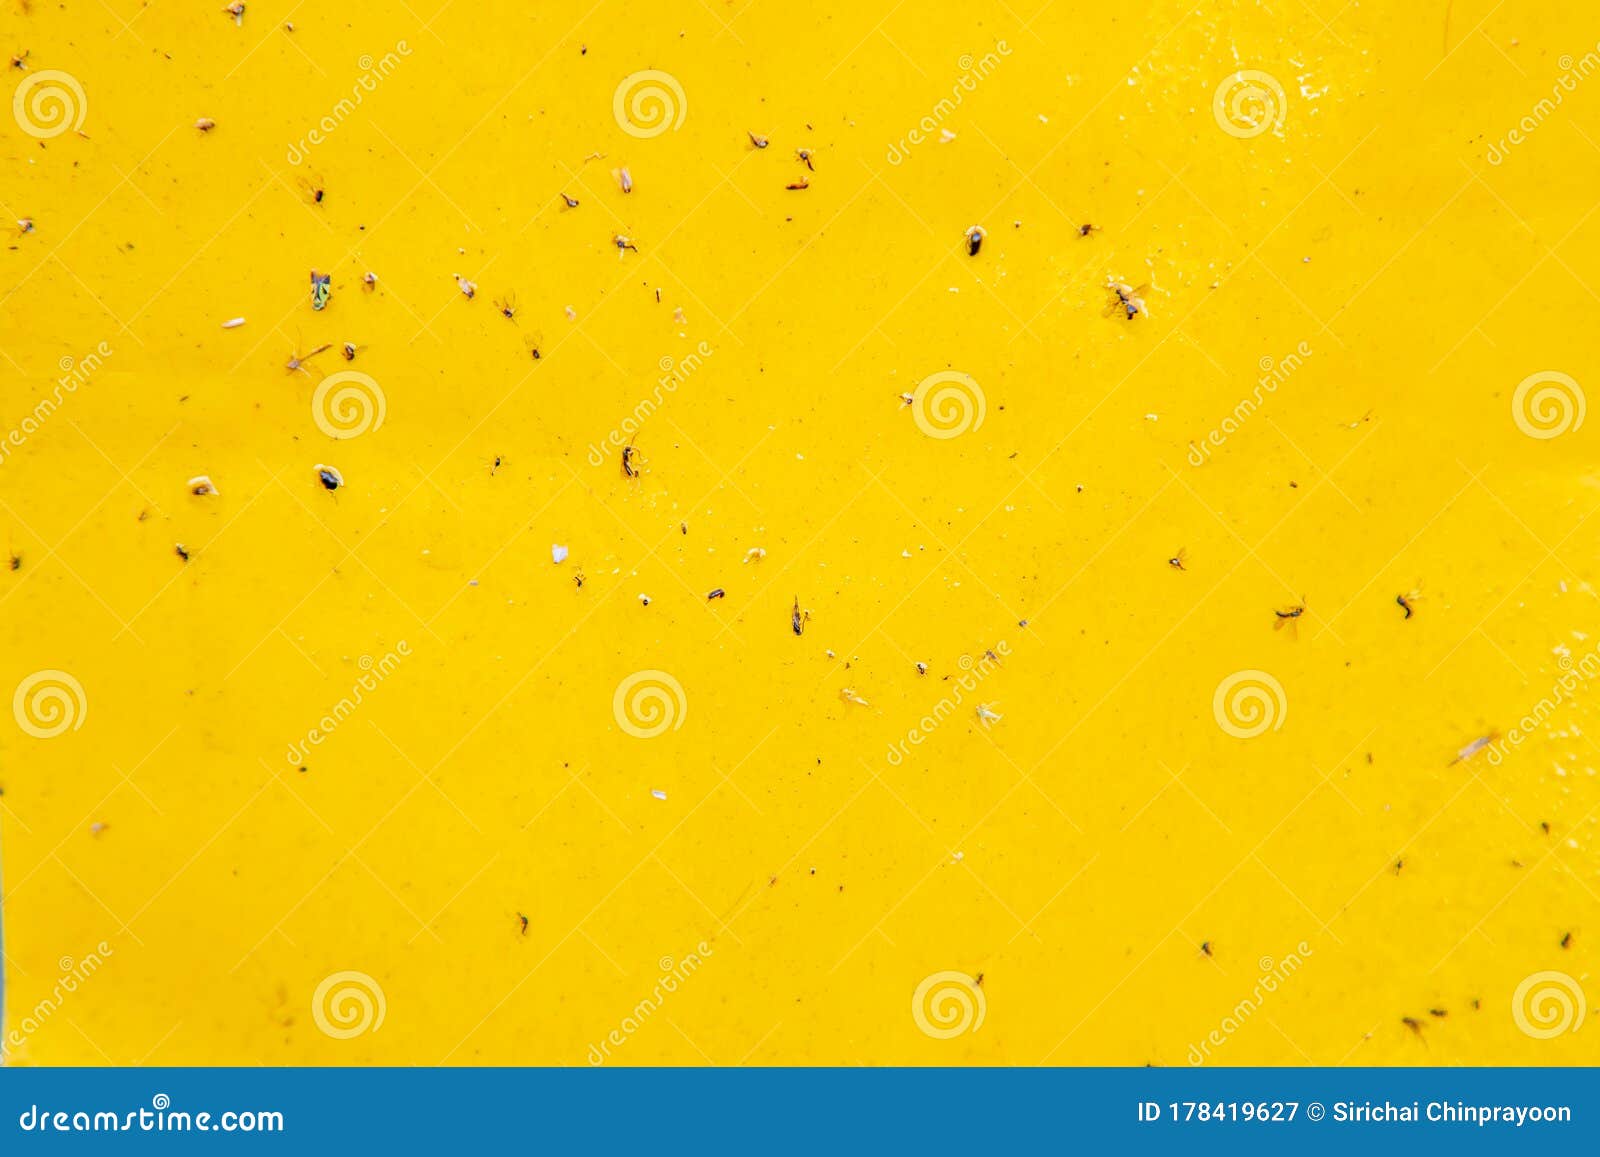 yellow sticky trab in agriculture farm